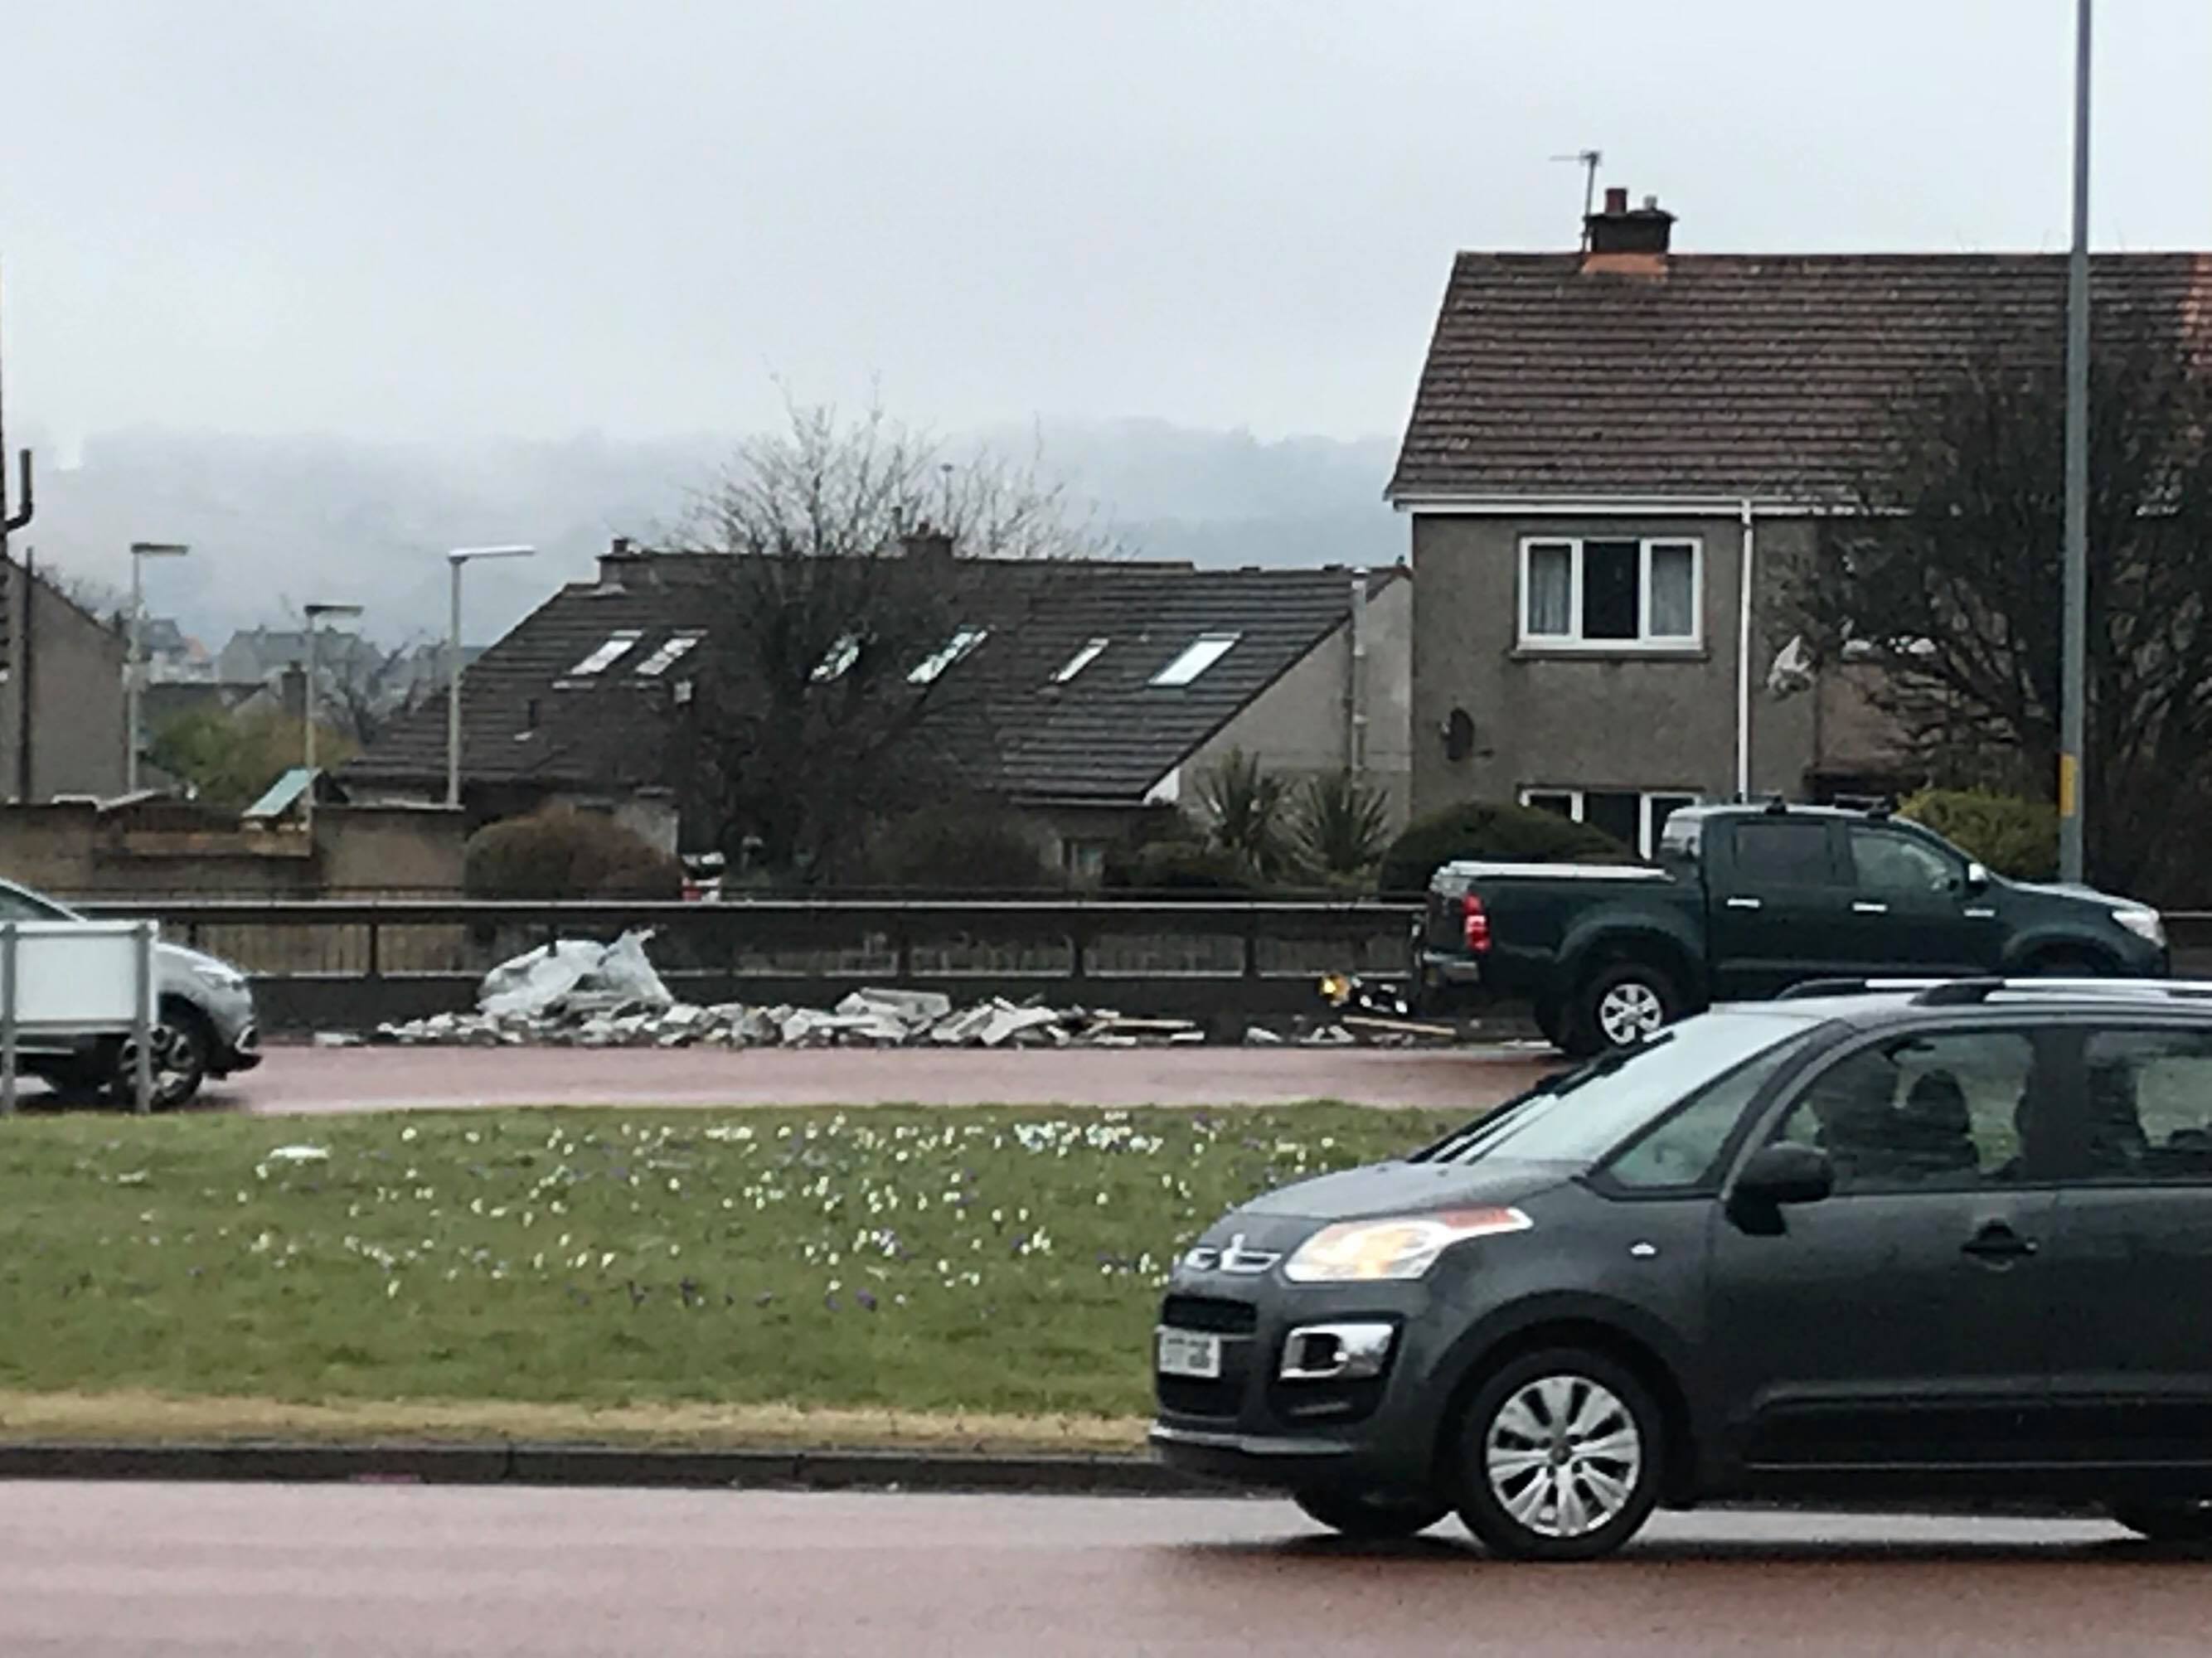 The scene at the Strathmartine Roundabout